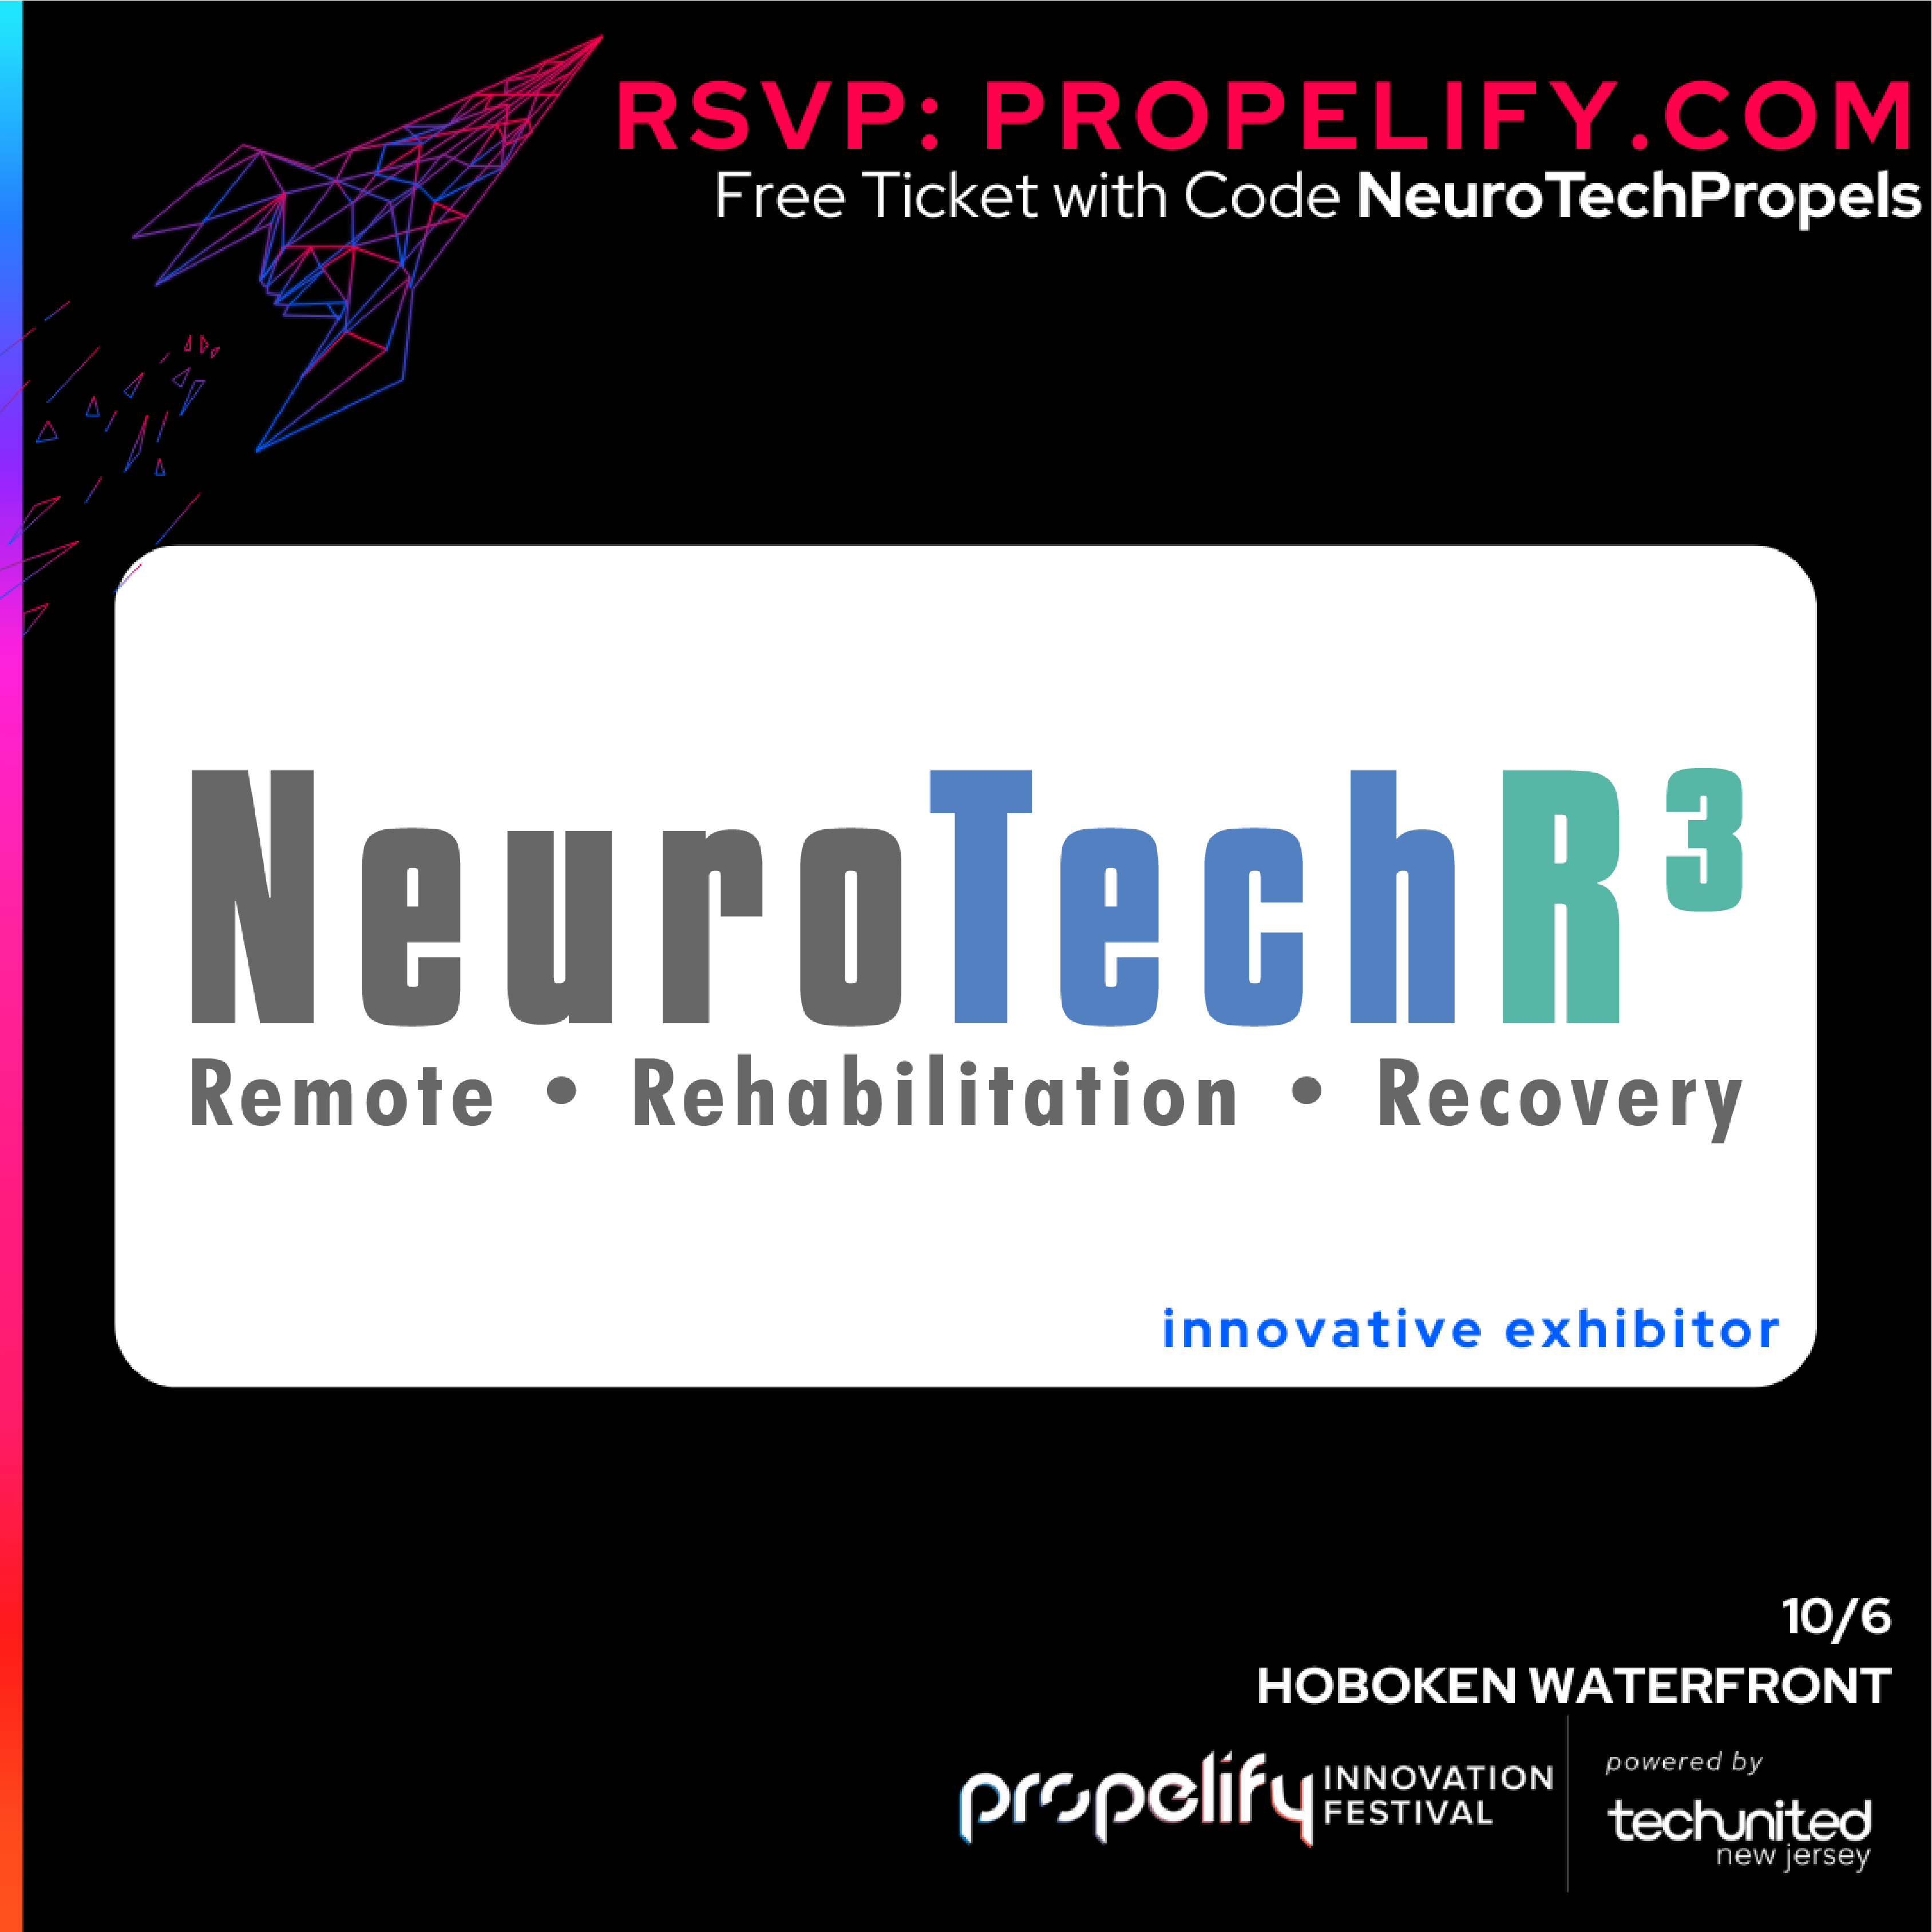 Join NeuroTechR3 at Propelify